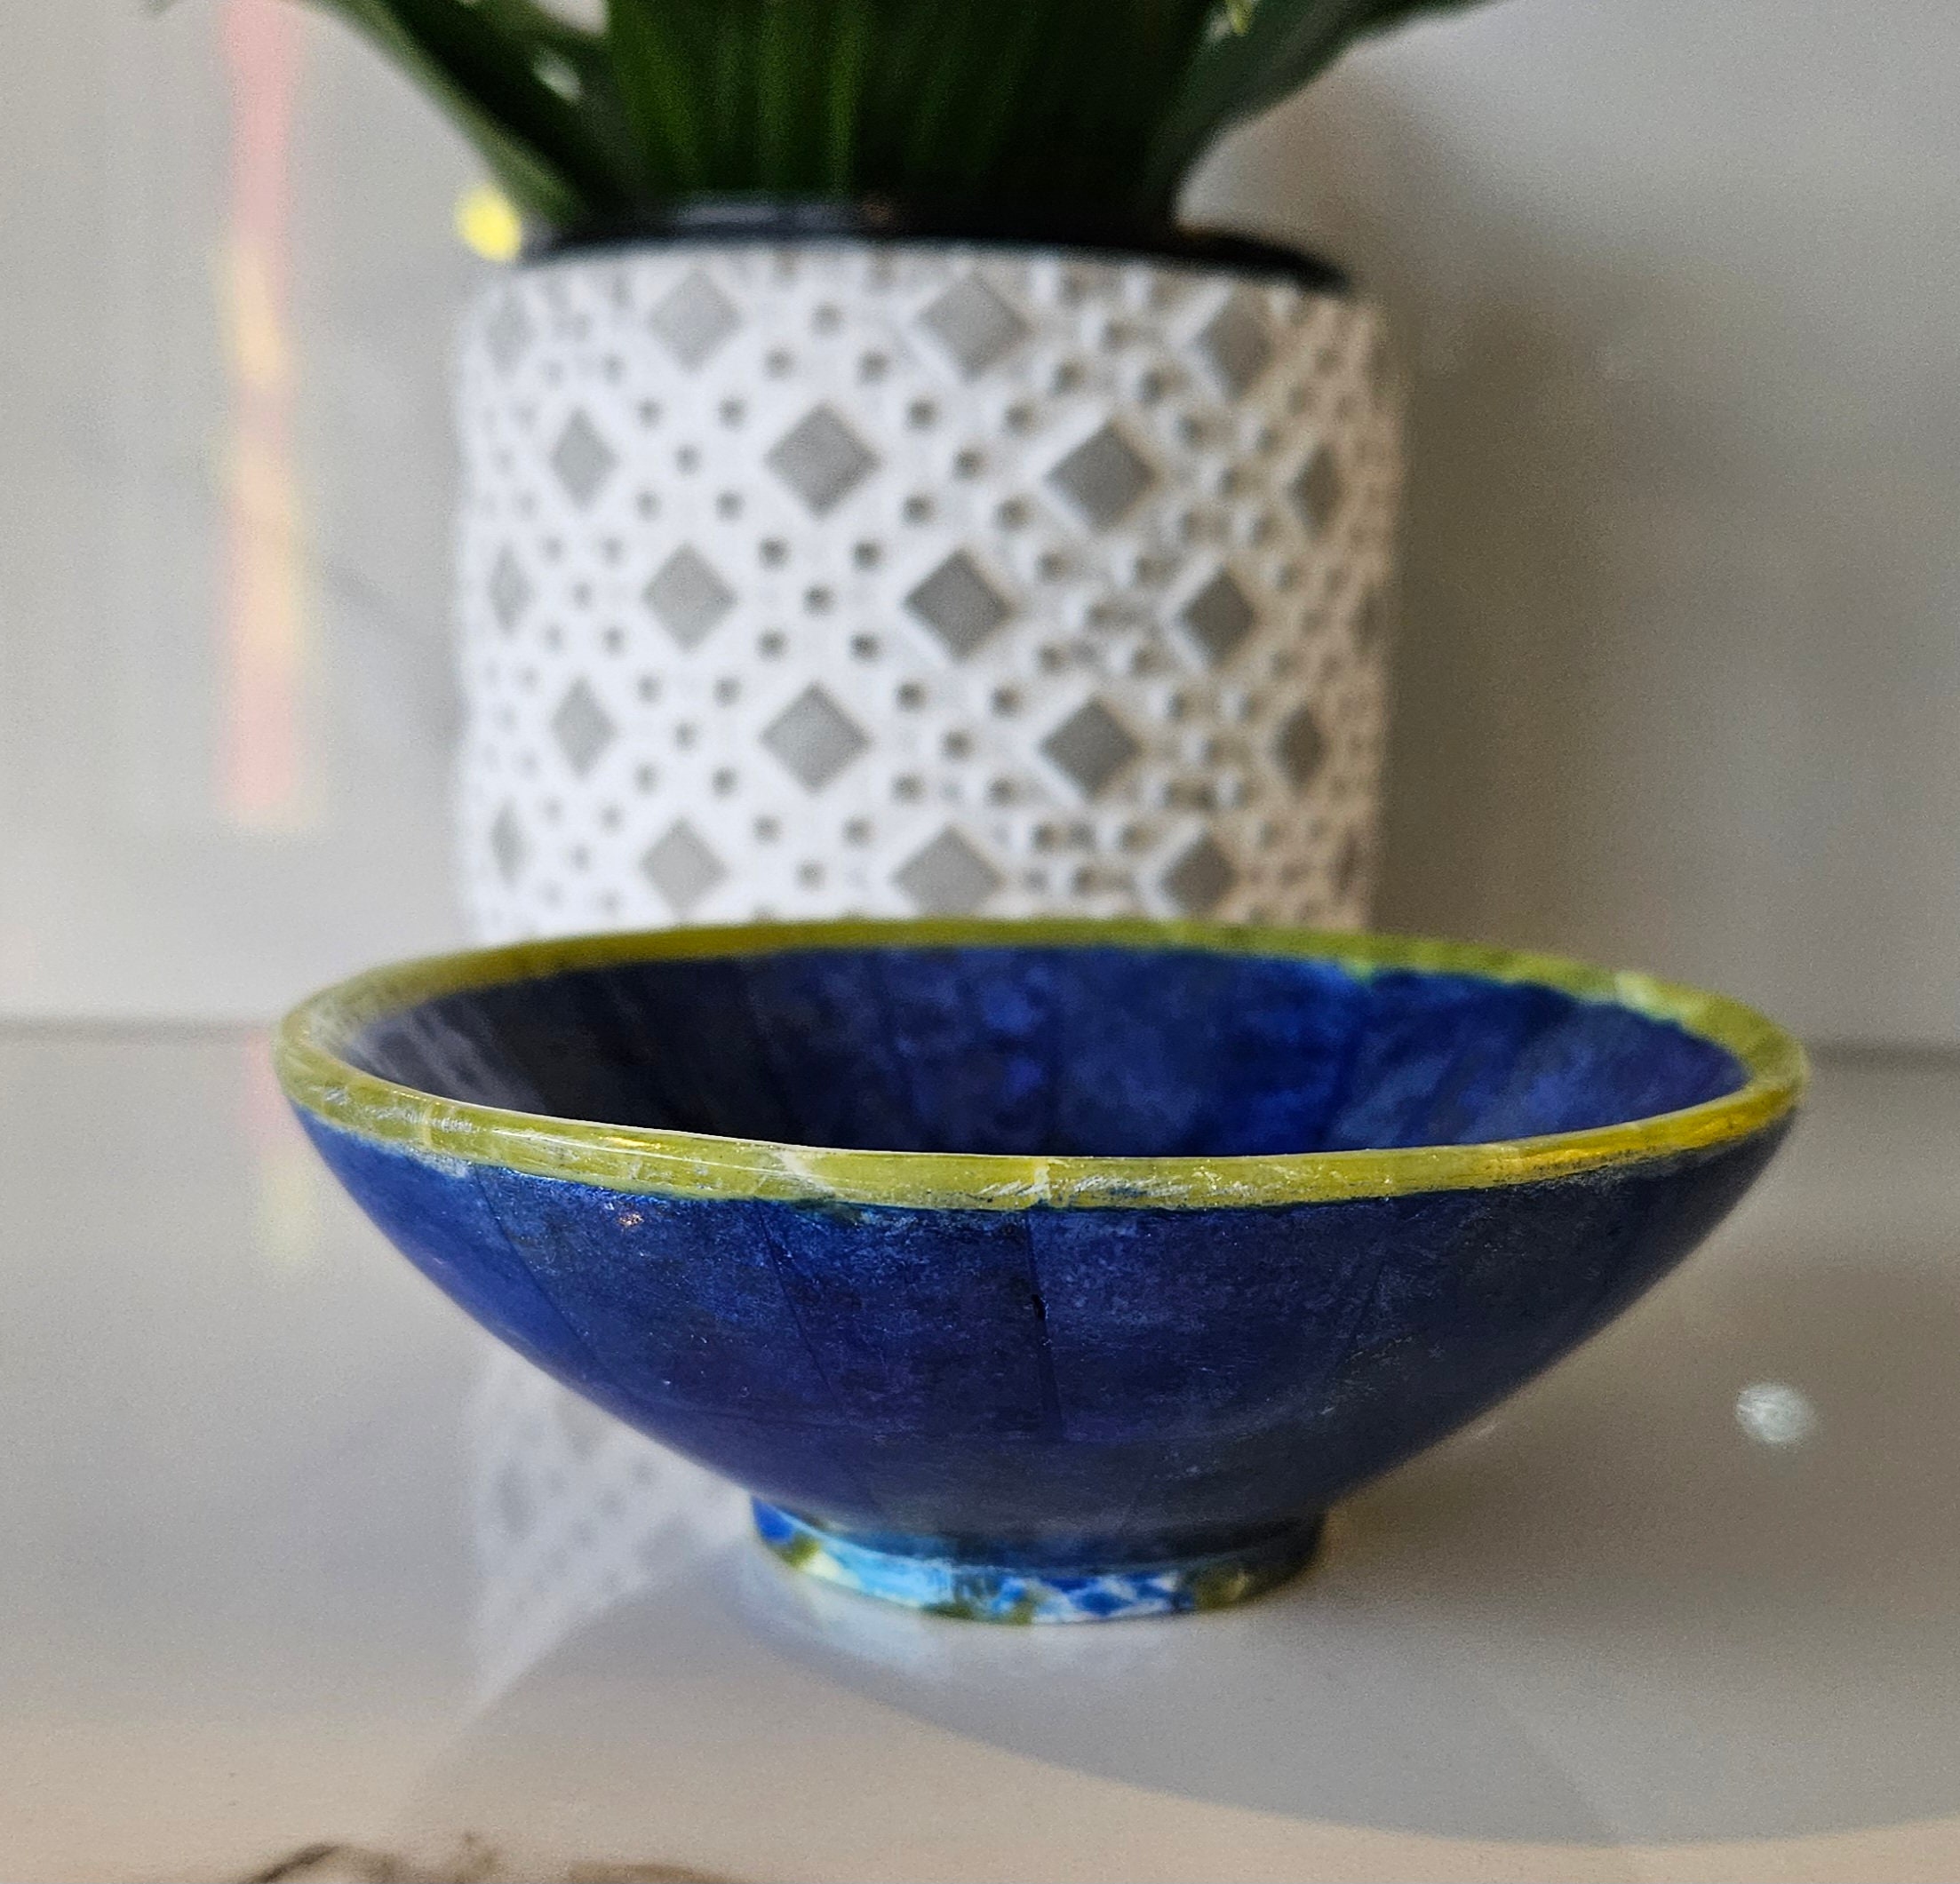 LAPIS LAZULI BOWL, Royal Blue Bowl, Handcrafted Boat Shape Polished Bowl, Desk Accessories, Crystal Gifts, loose stone, Stability, natural